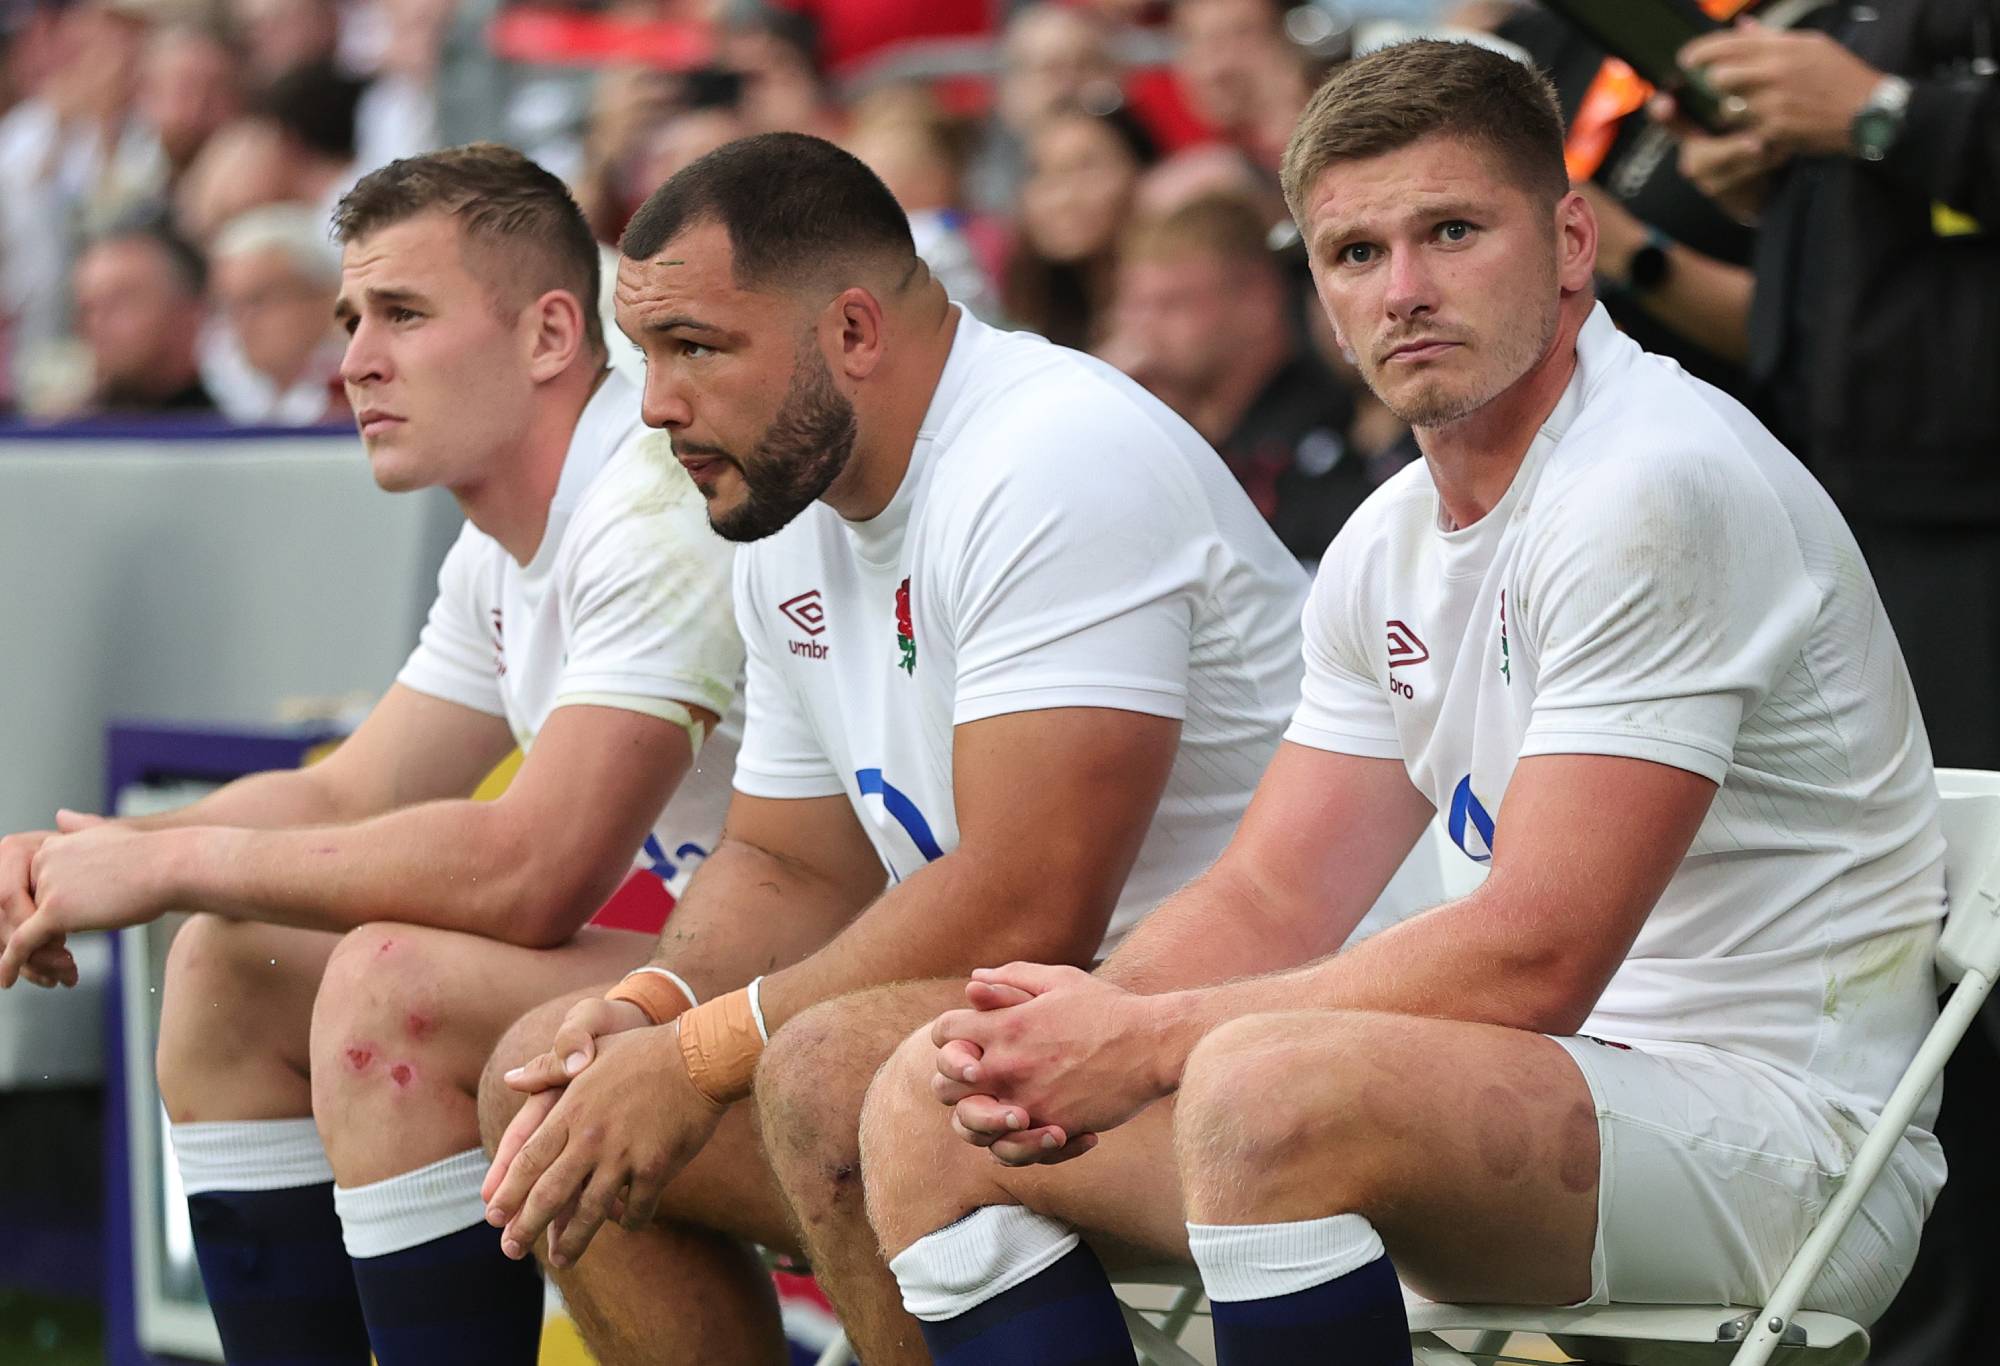 Owen Farrell, the England captain, sits in the sin bin with team mates Ellis Genge and Freddie Steward after they all received yellow cards during the Summer International match between England and Wales at Twickenham Stadium on August 12, 2023 in London, England. (Photo by David Rogers/Getty Images)